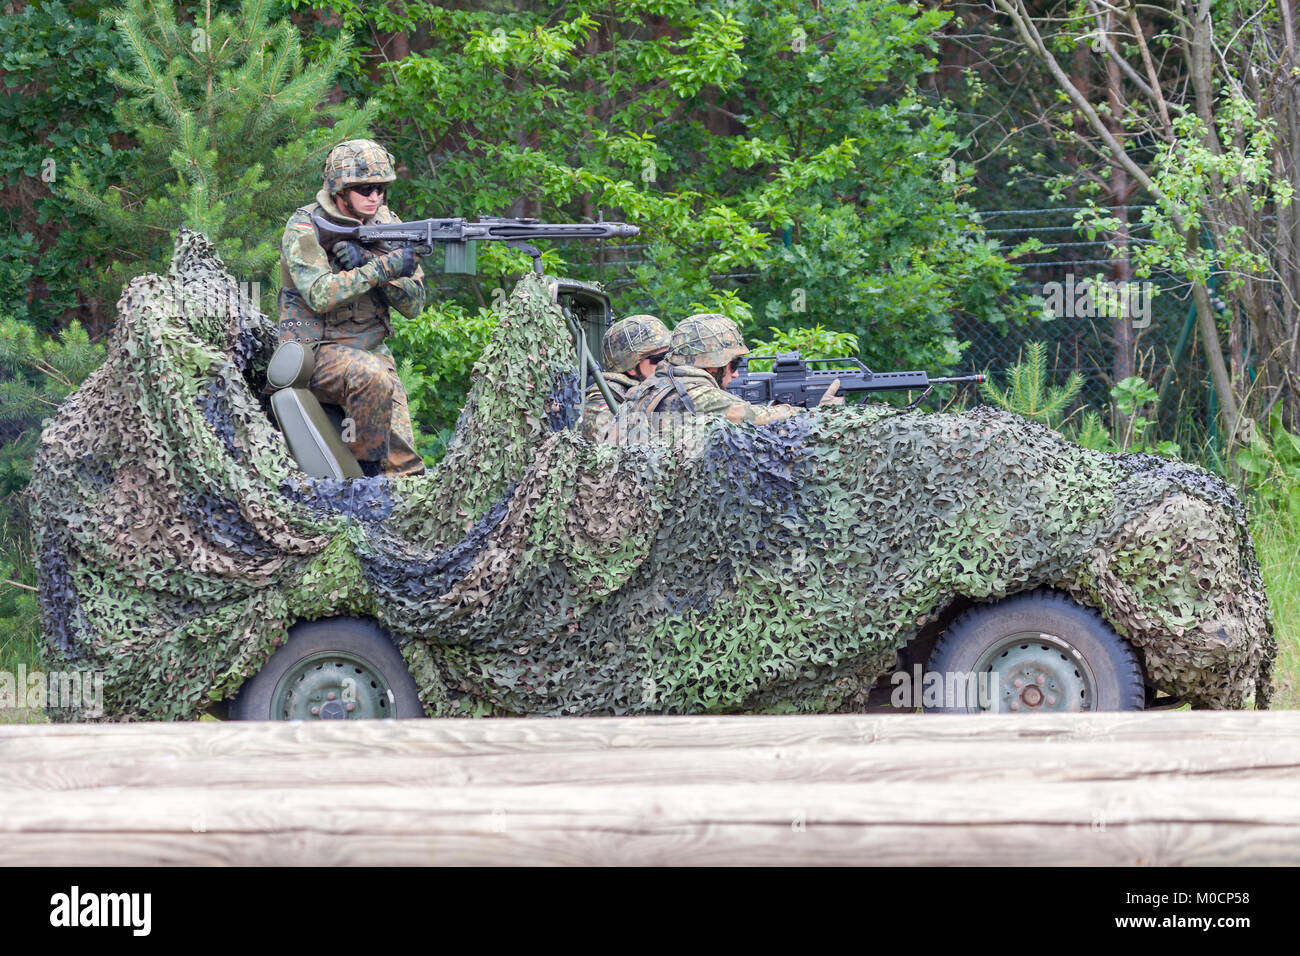 BURG / GERMANY - JUNE 25, 2016: german soldiers on mercedes benz wolf, at open day in barrack burg Stock Photo